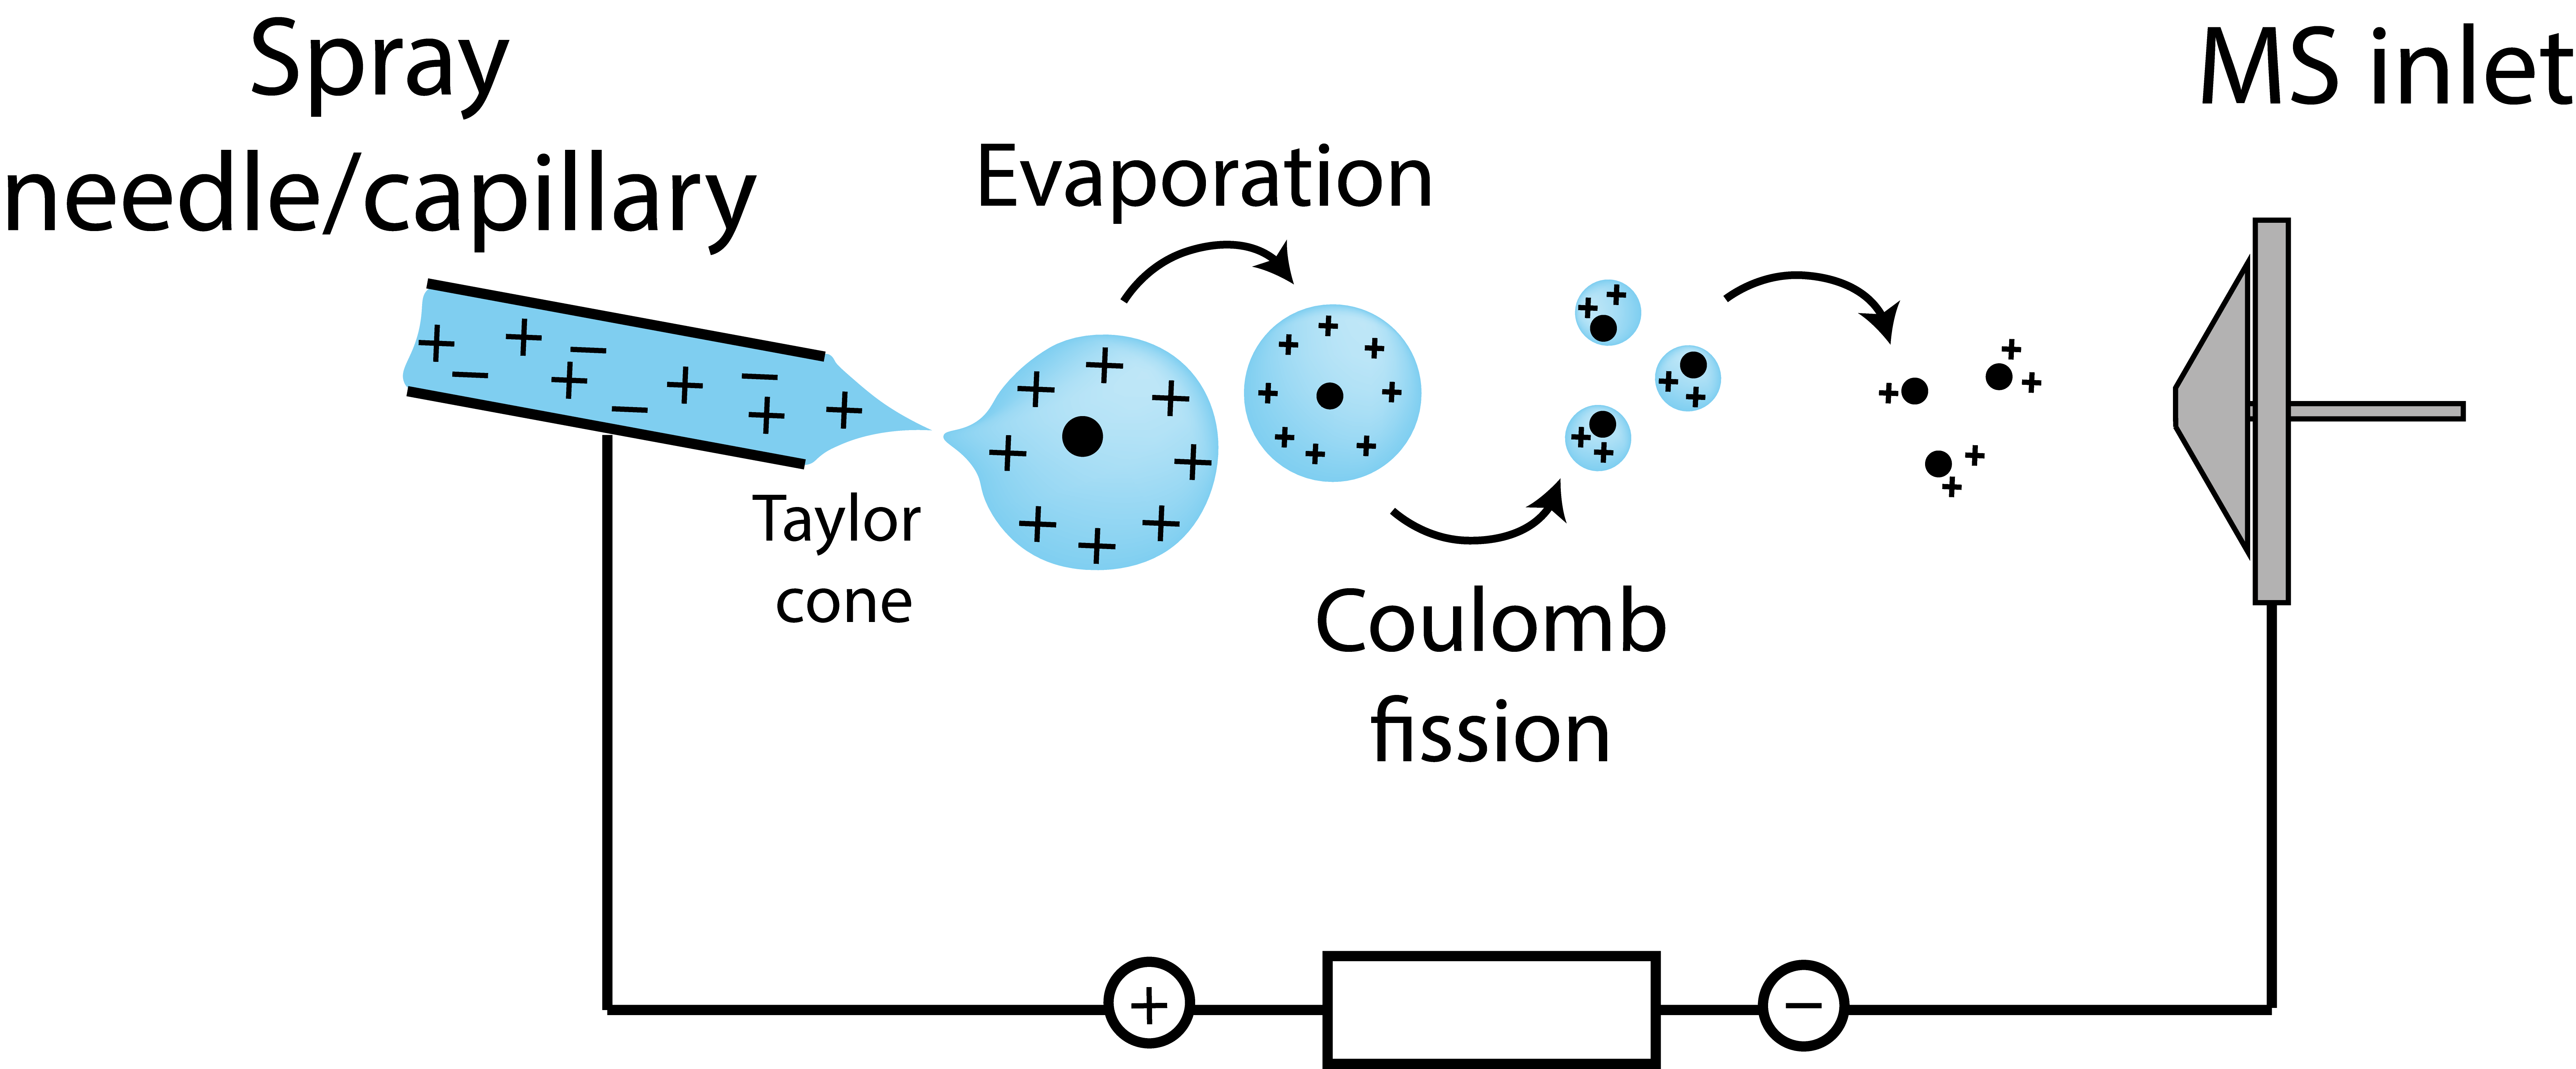 Figure 7: Electrospray Ionization Charged droplets are formed, their size is reduced due to evaporation until charge repulsion leads to Coulomb fission and results in charged analyte molecules.